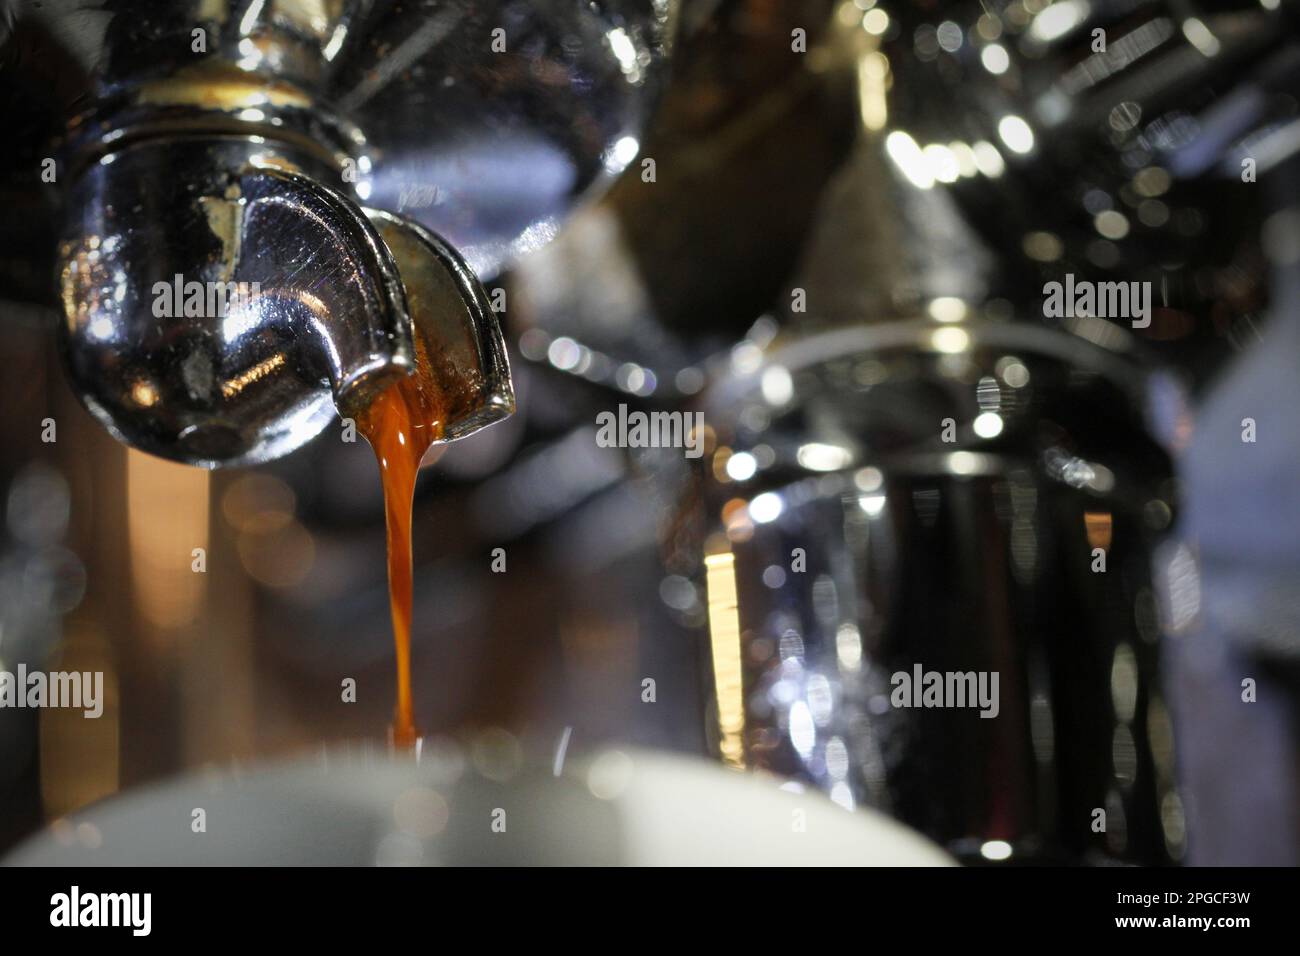 Coffee Extraction From The Coffee Machine With A Portafilter Pouring Coffee  Into A Cupespresso Poruing From Coffee Machine At Coffee Shop Stock Photo -  Download Image Now - iStock